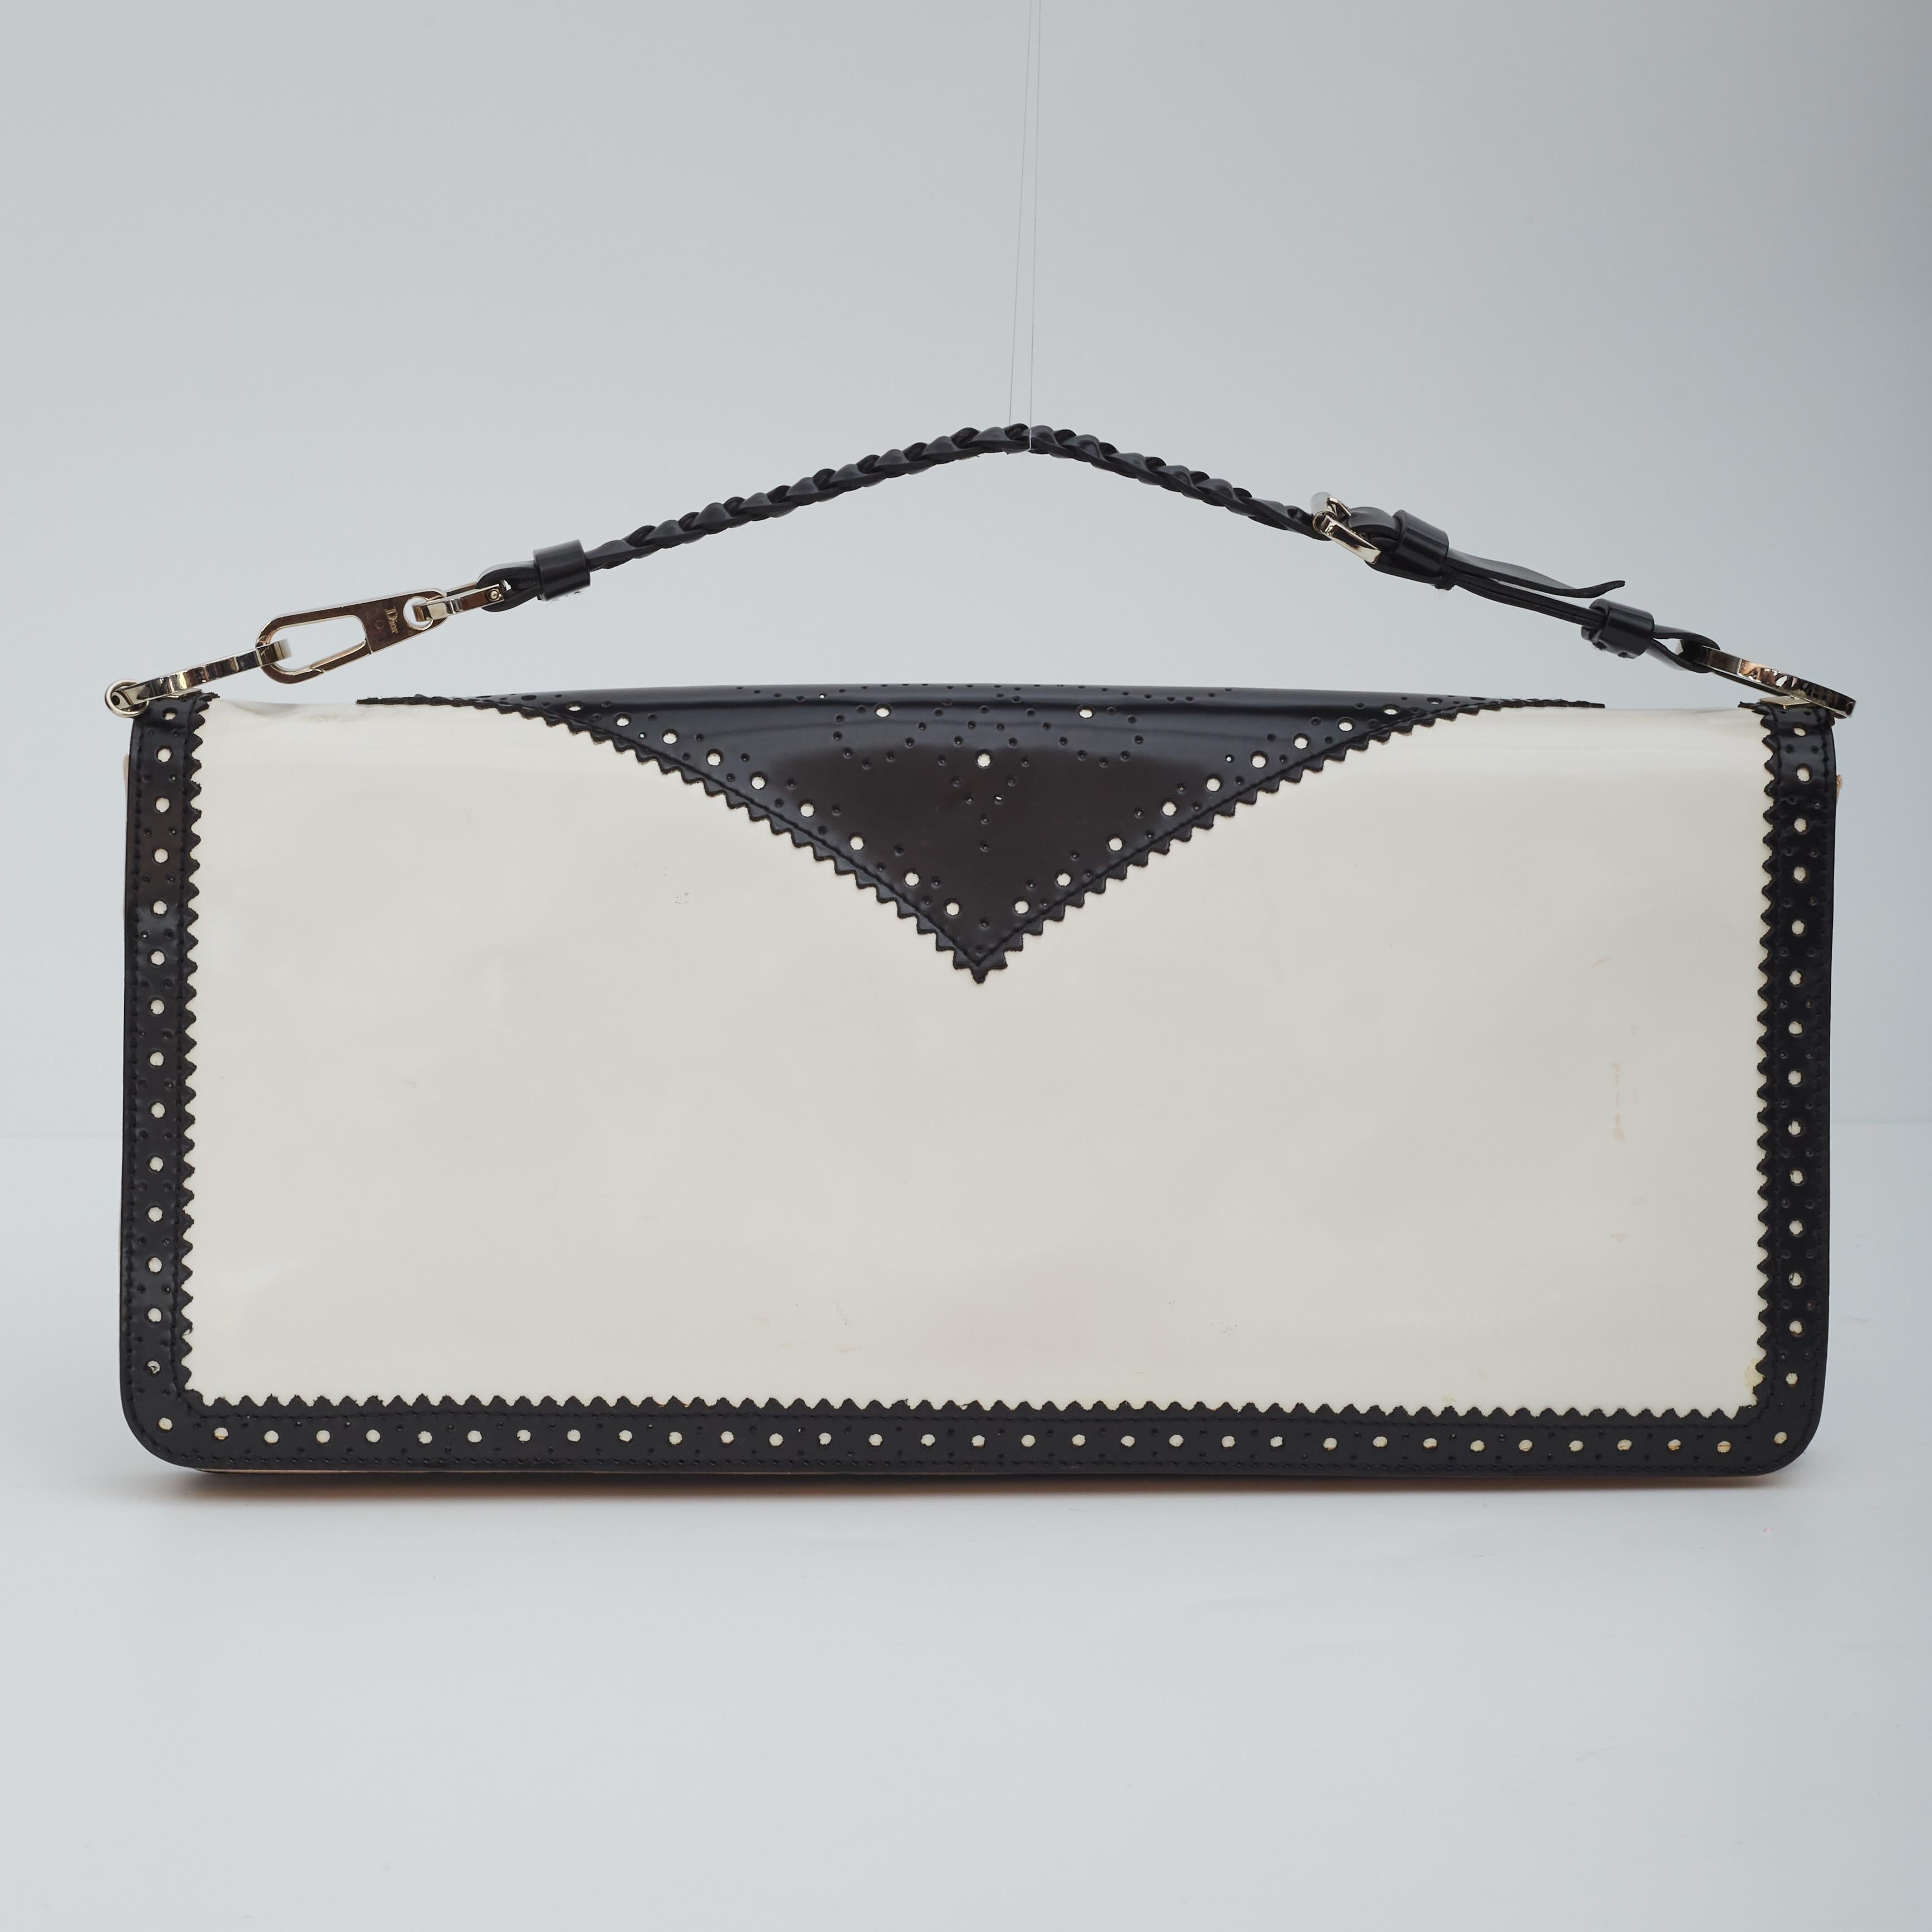 Dior bag from the art-deco D-TRICK series in black and white patent leather with silver metal hardware. Interior linking is silk with a p pocket inside with a mirror.
Black Dior logo lining 

Color: Black and white
Material: Patent leather
Item